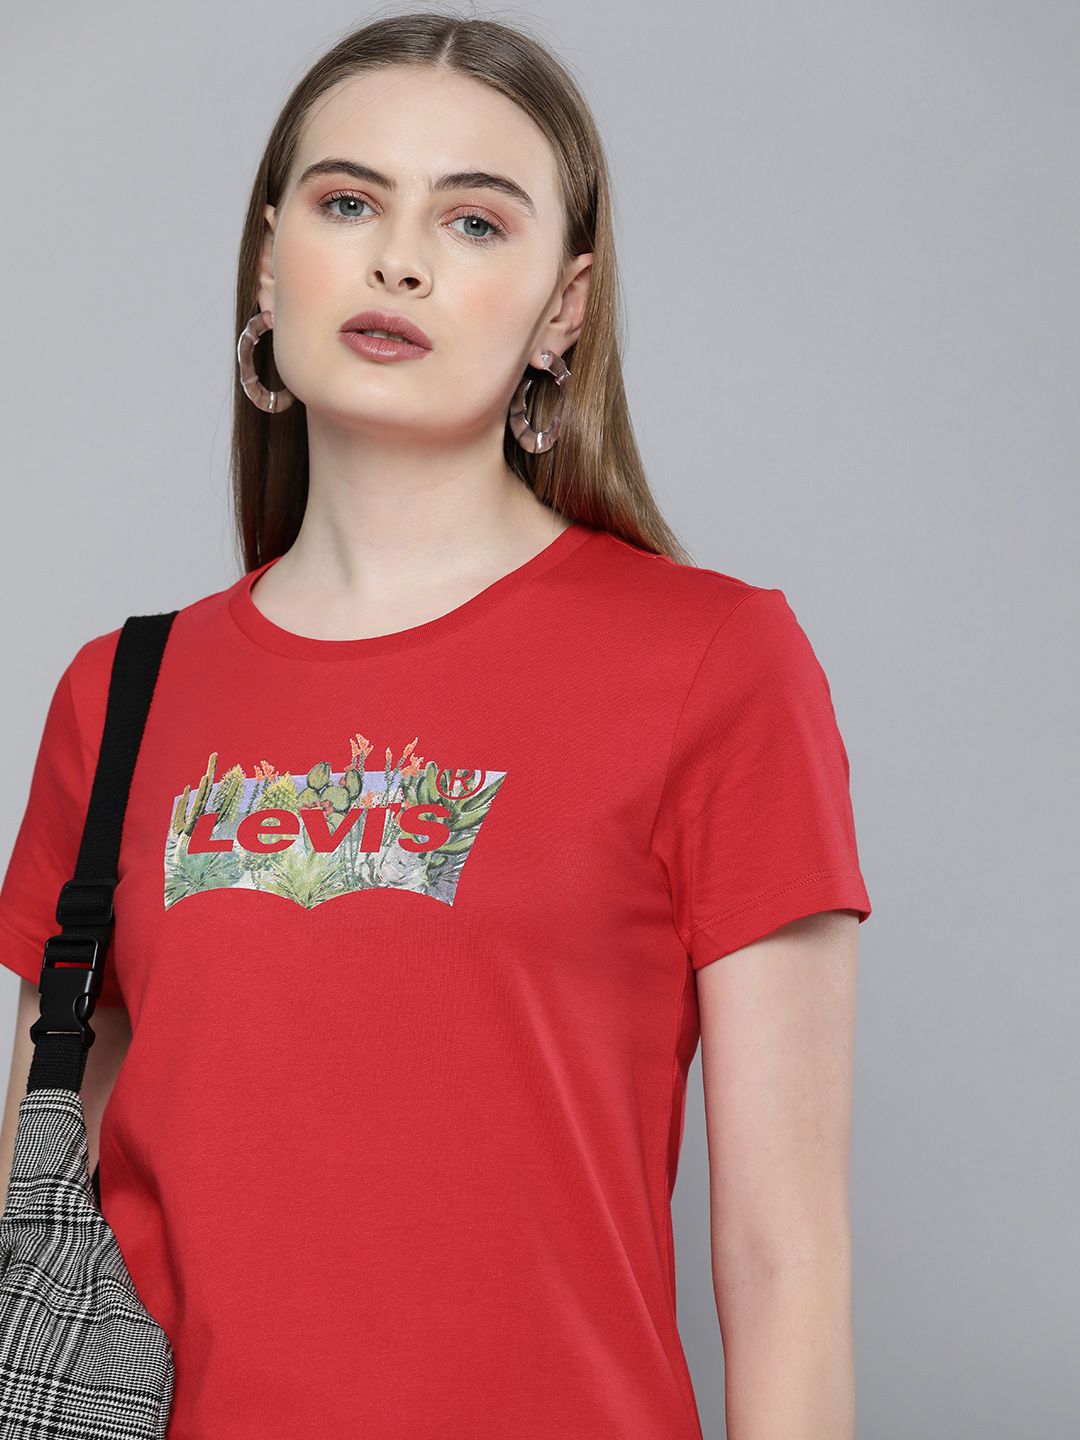 Levis Women Brand Logo Printed Pure Cotton T-shirt Price in India